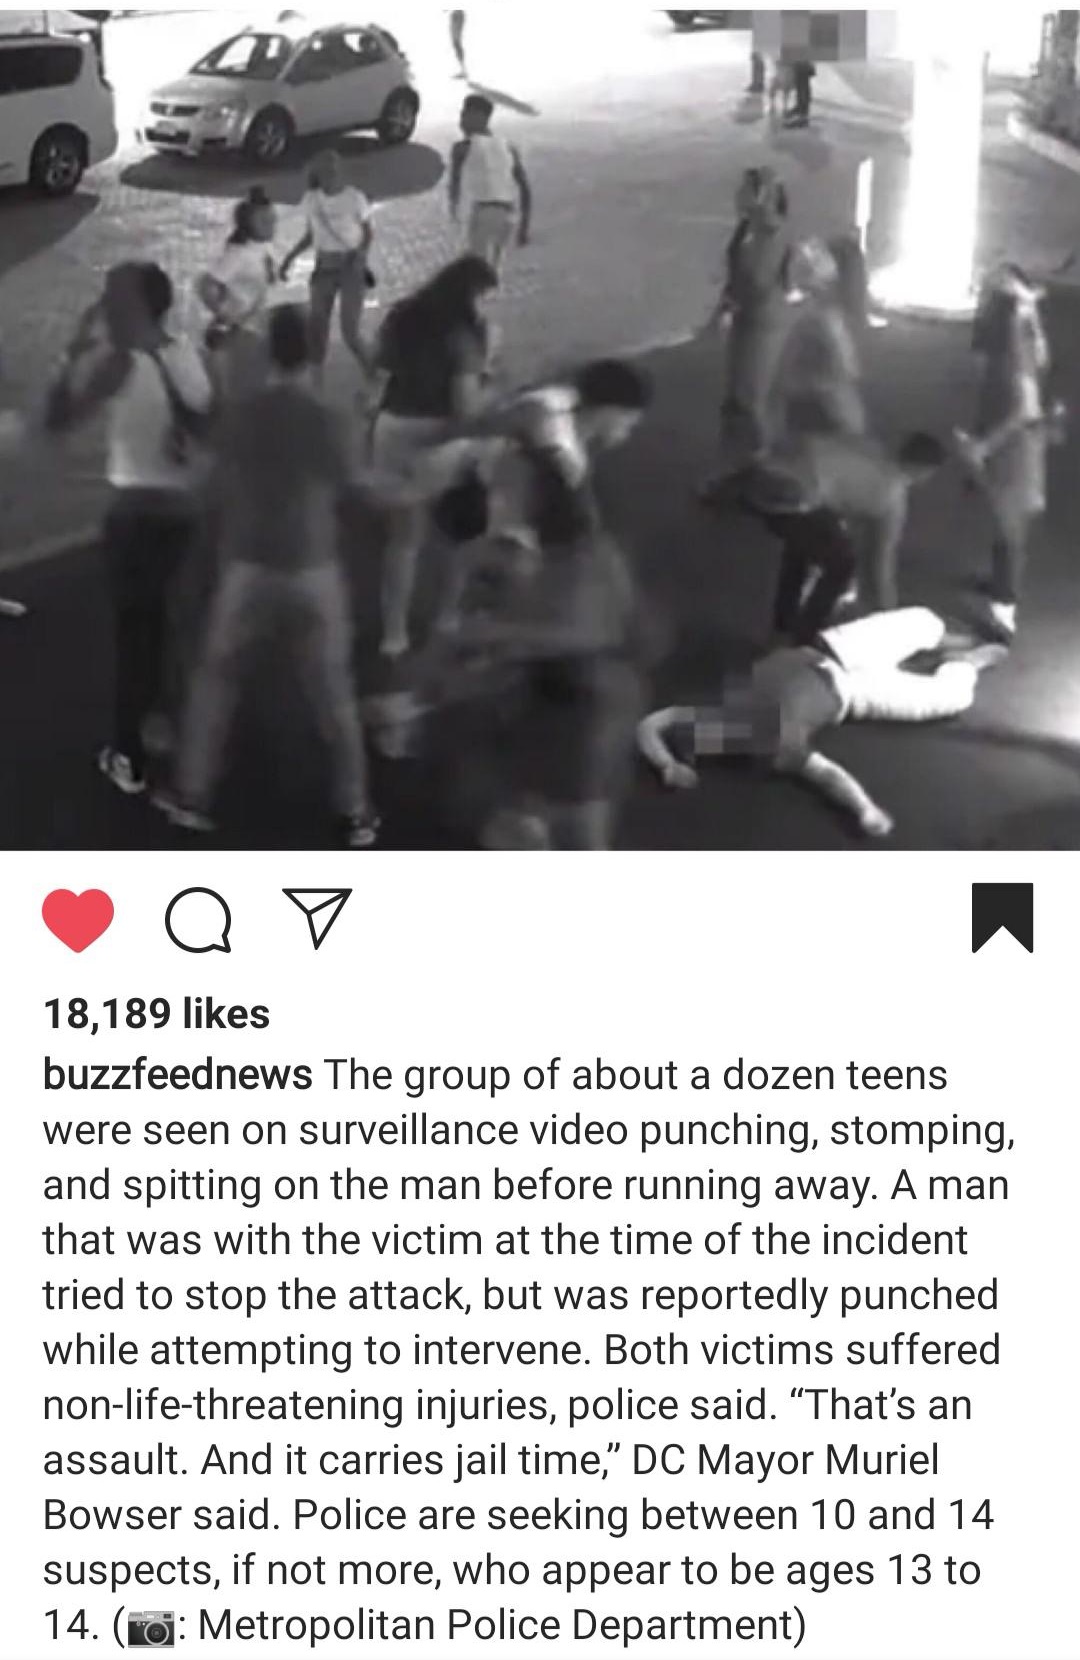 The group of about a dozen teens were seen on surveillance video punching, stomping, and spitting on the man before running away. A man that was with the victim at the time of the incident tried to stop the attack, but